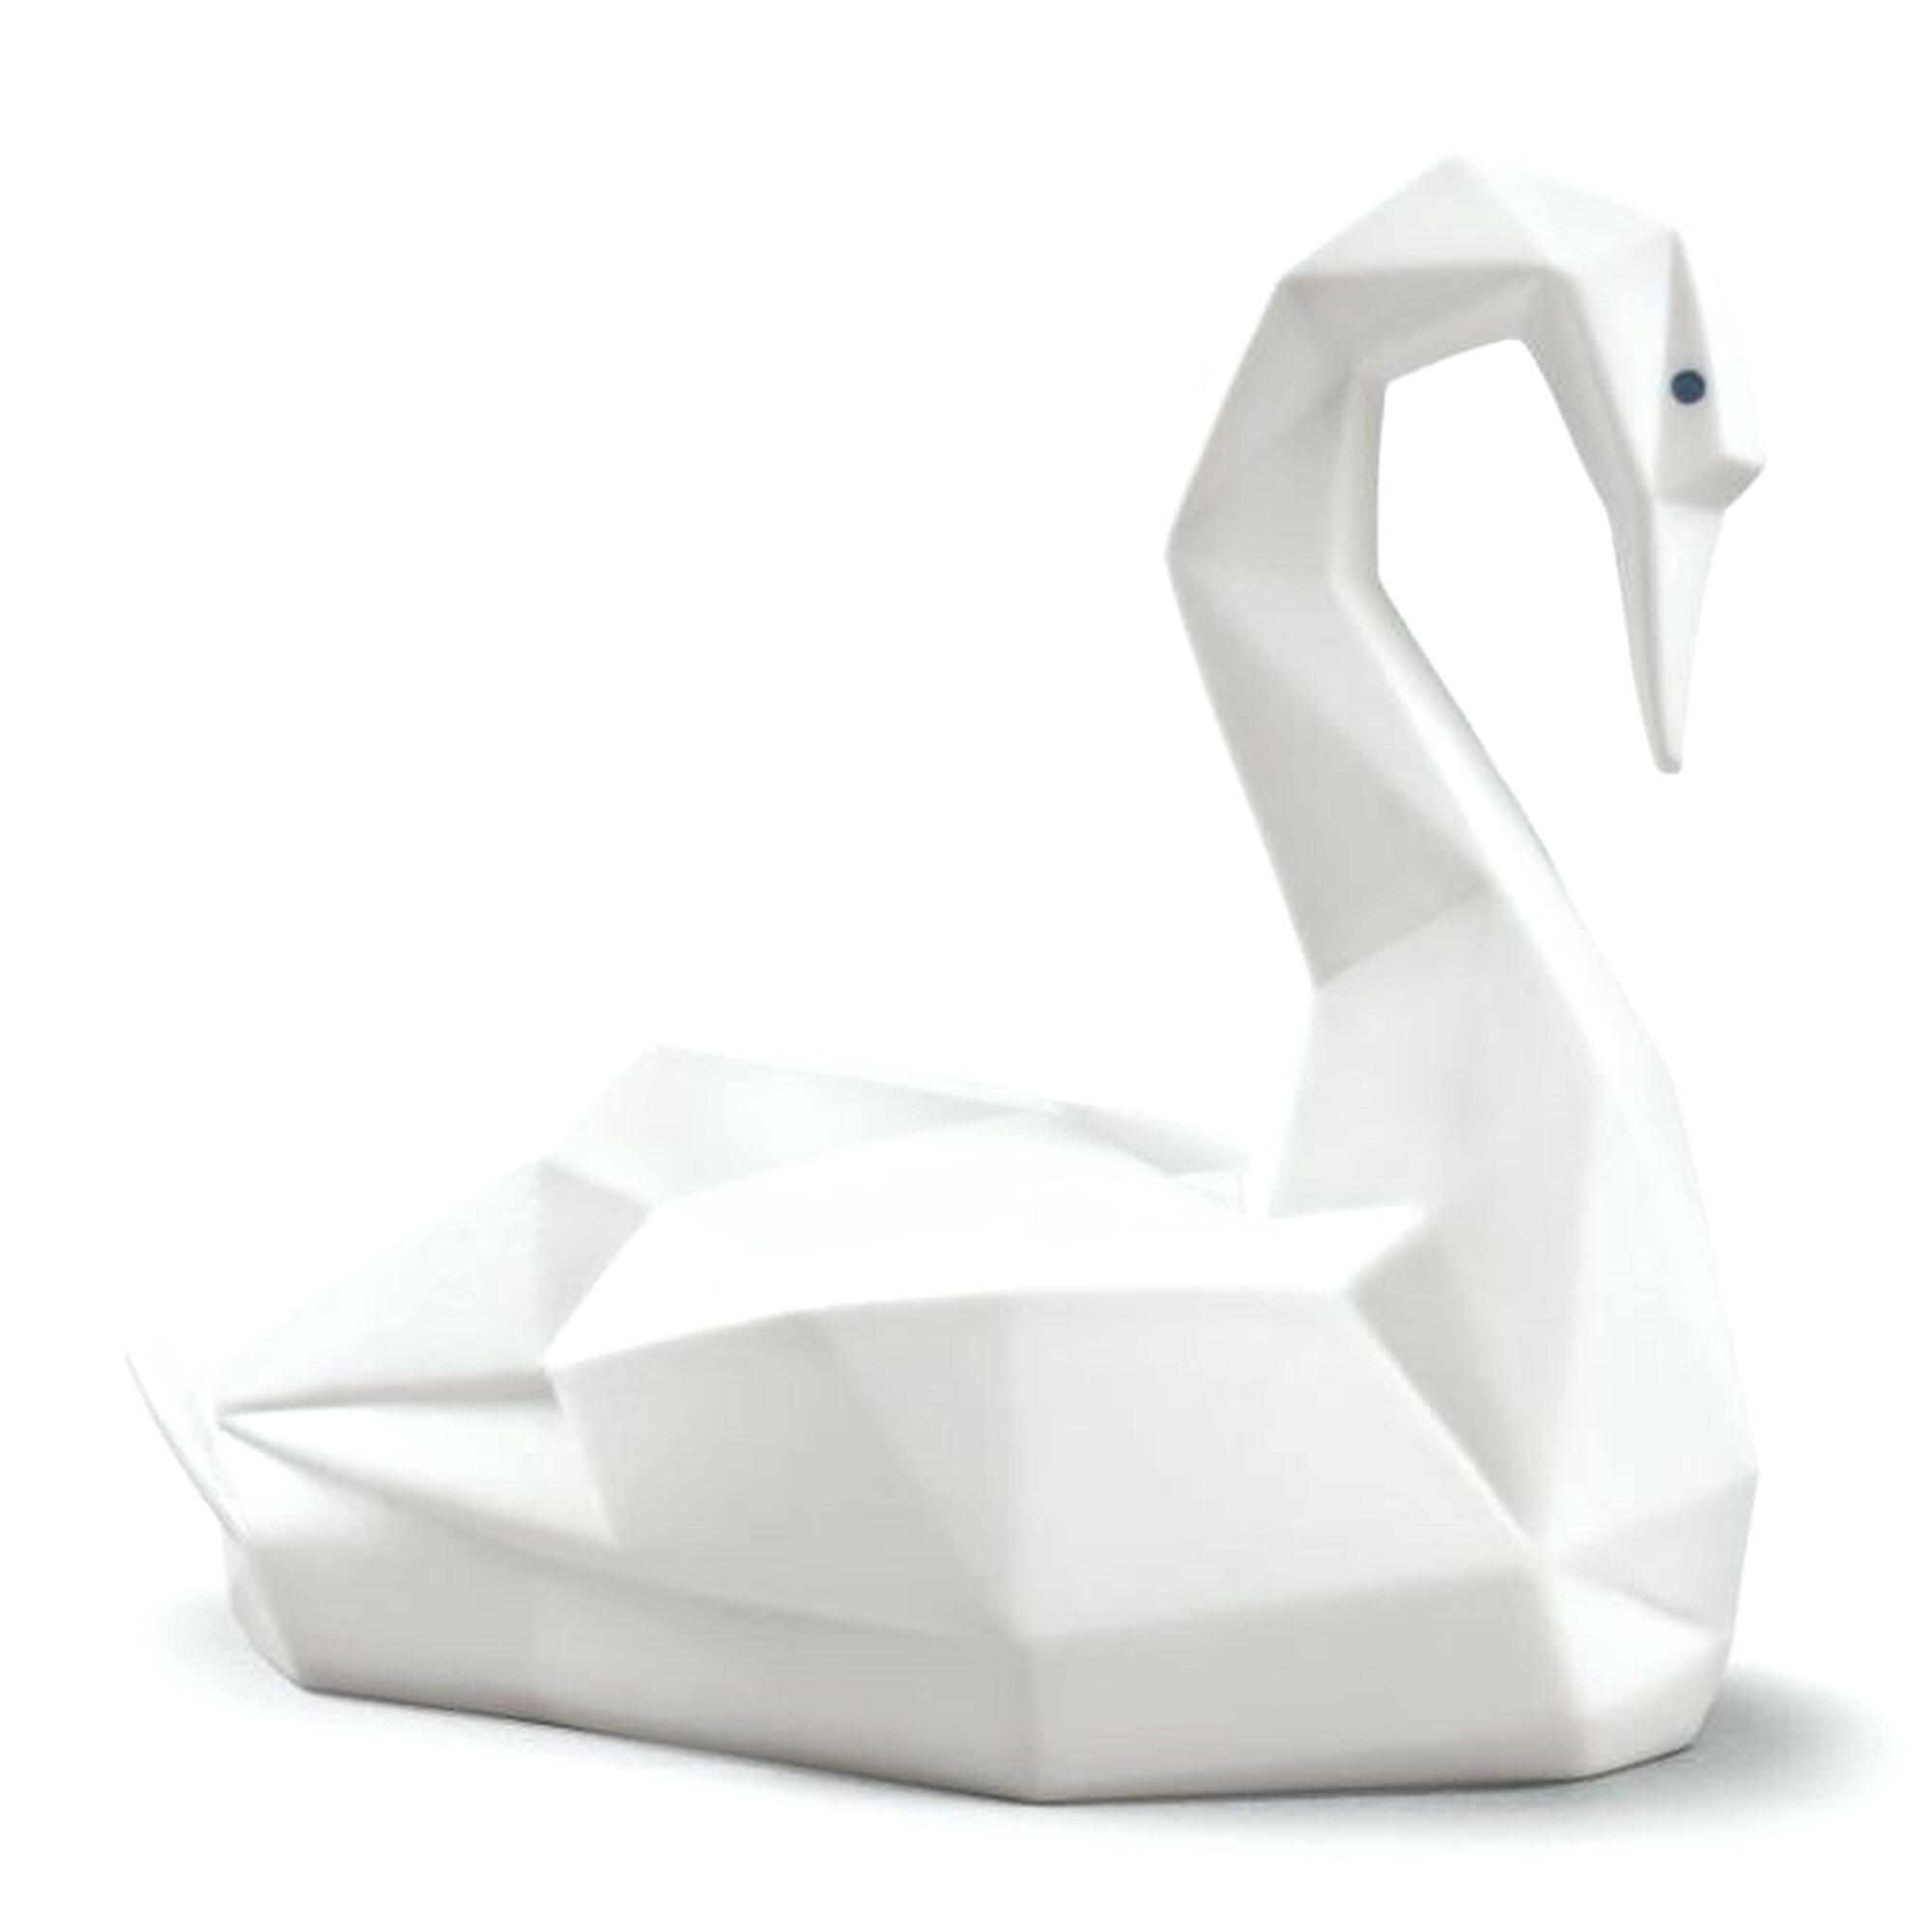 How To Make Origami Swans Origami Swan Swan Origami Origami Crane Meaning Love